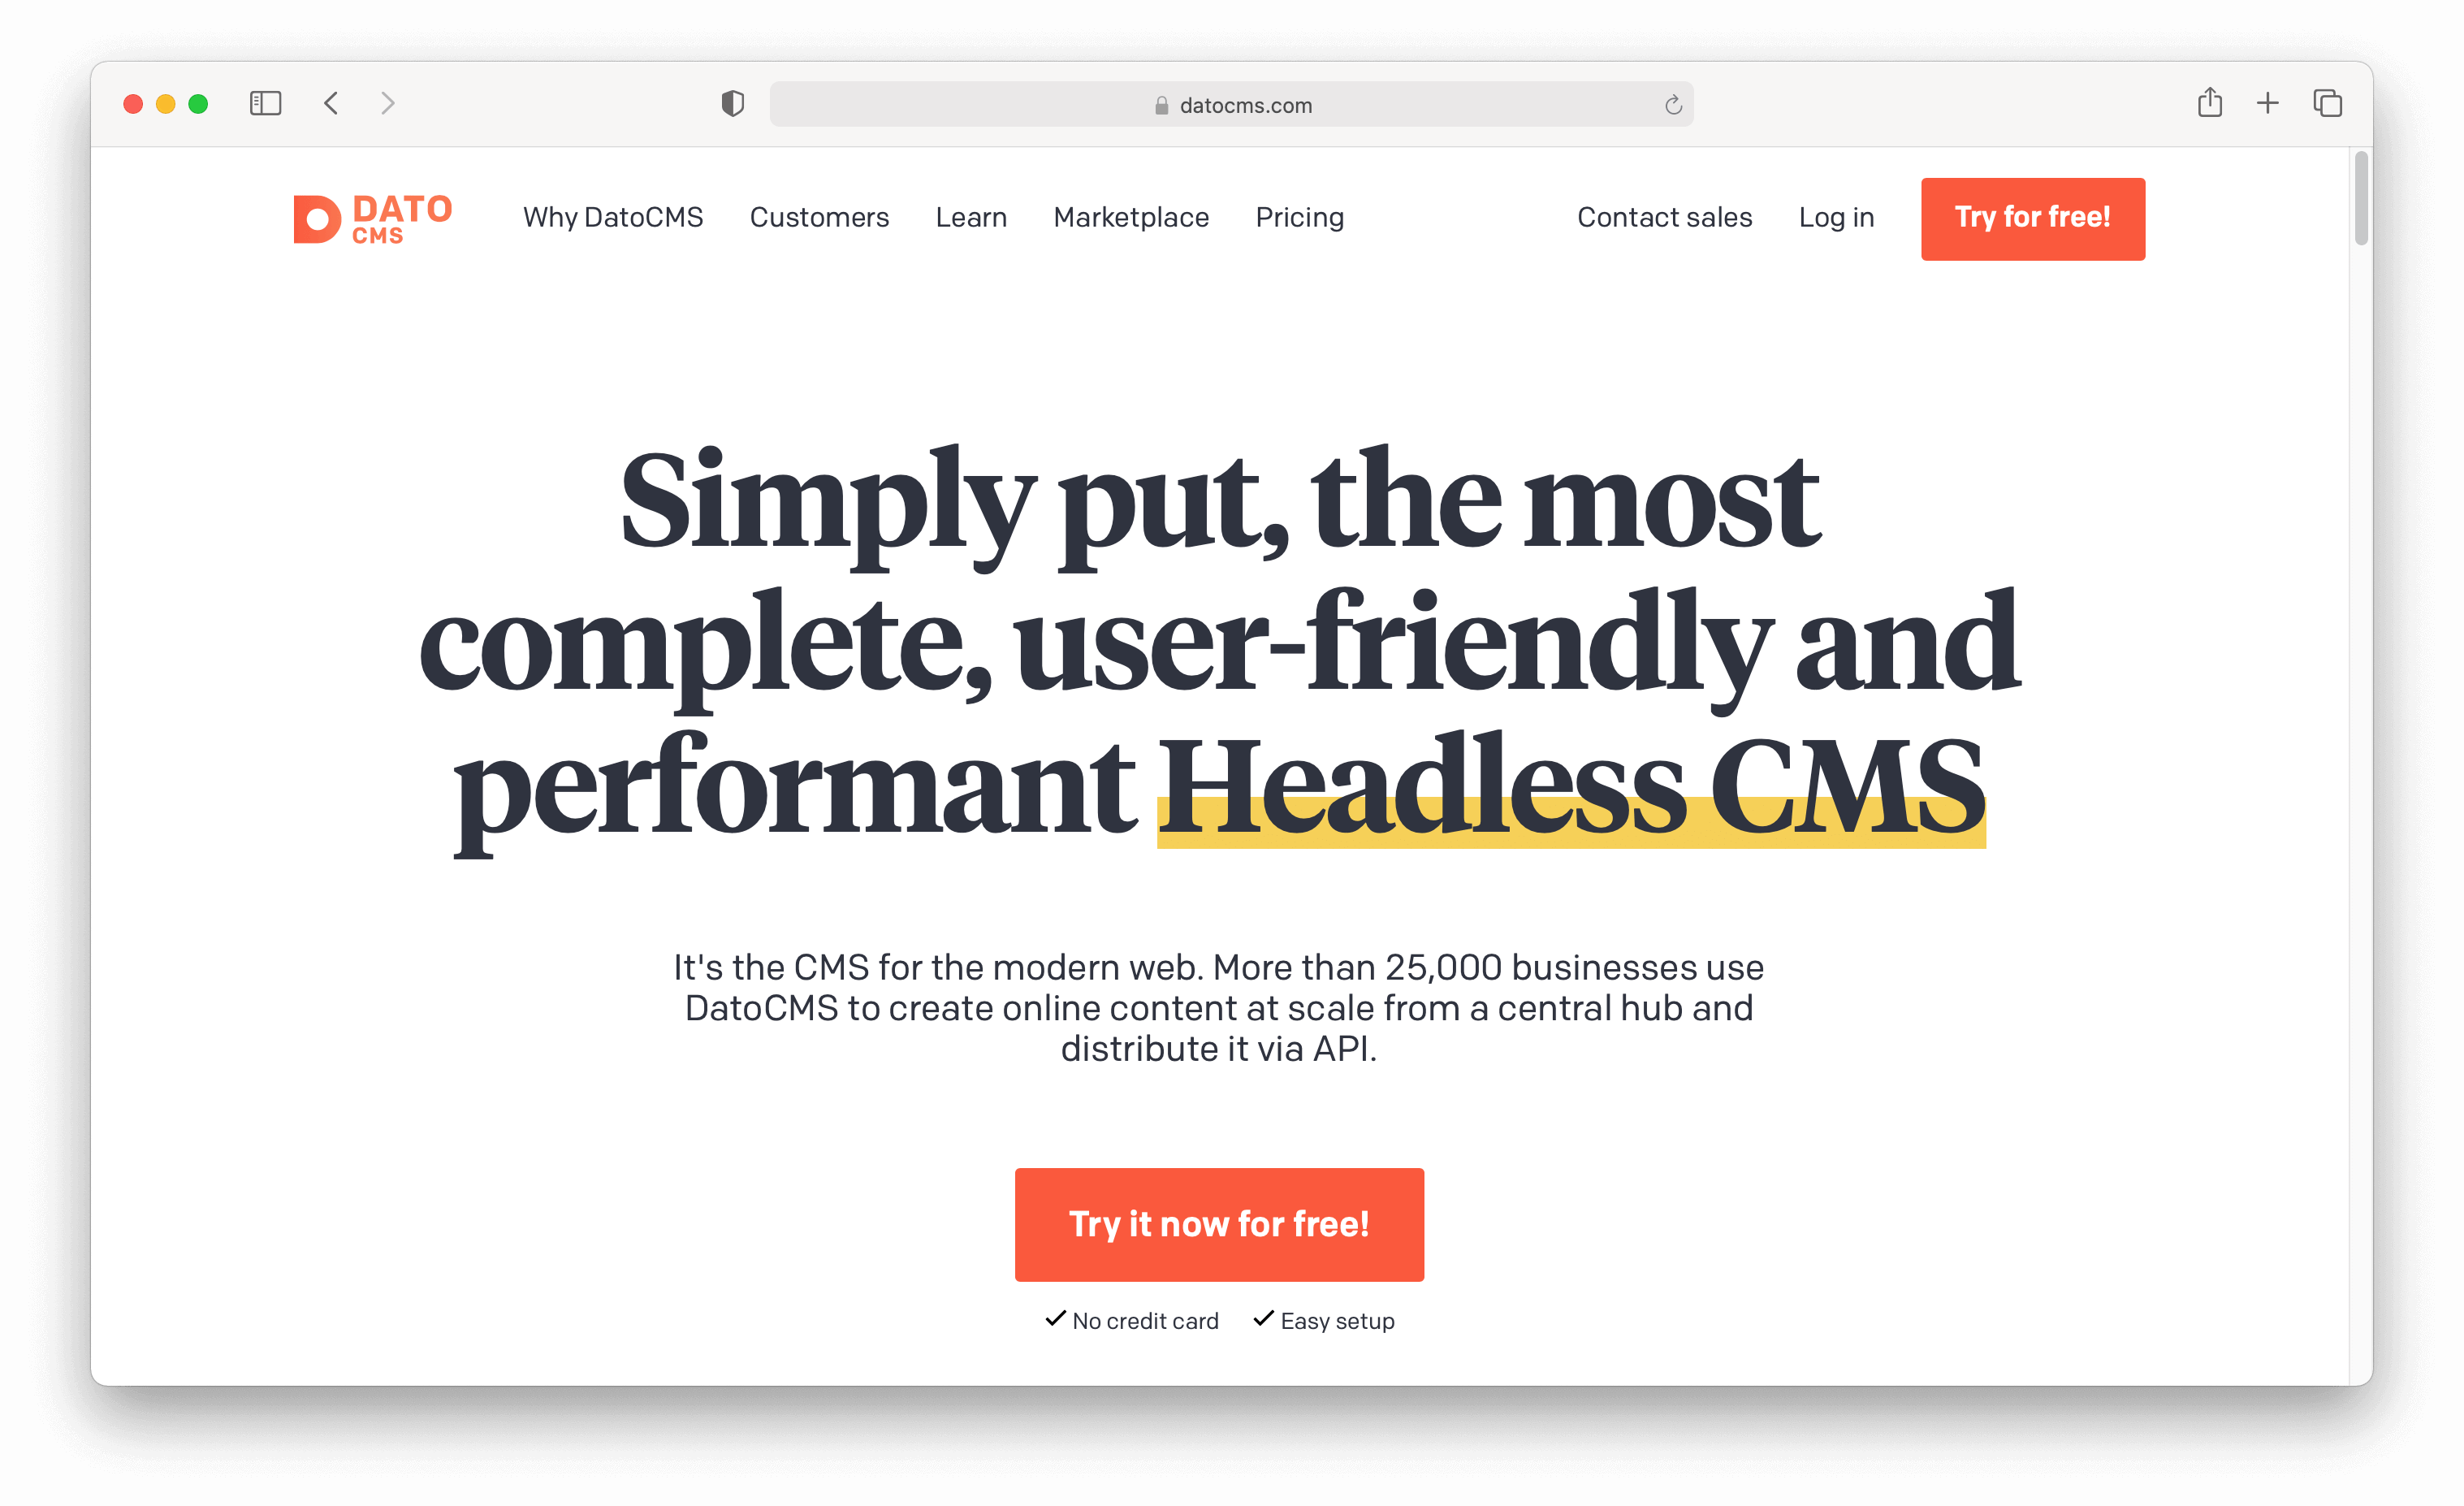 Dato CMS does not work in China